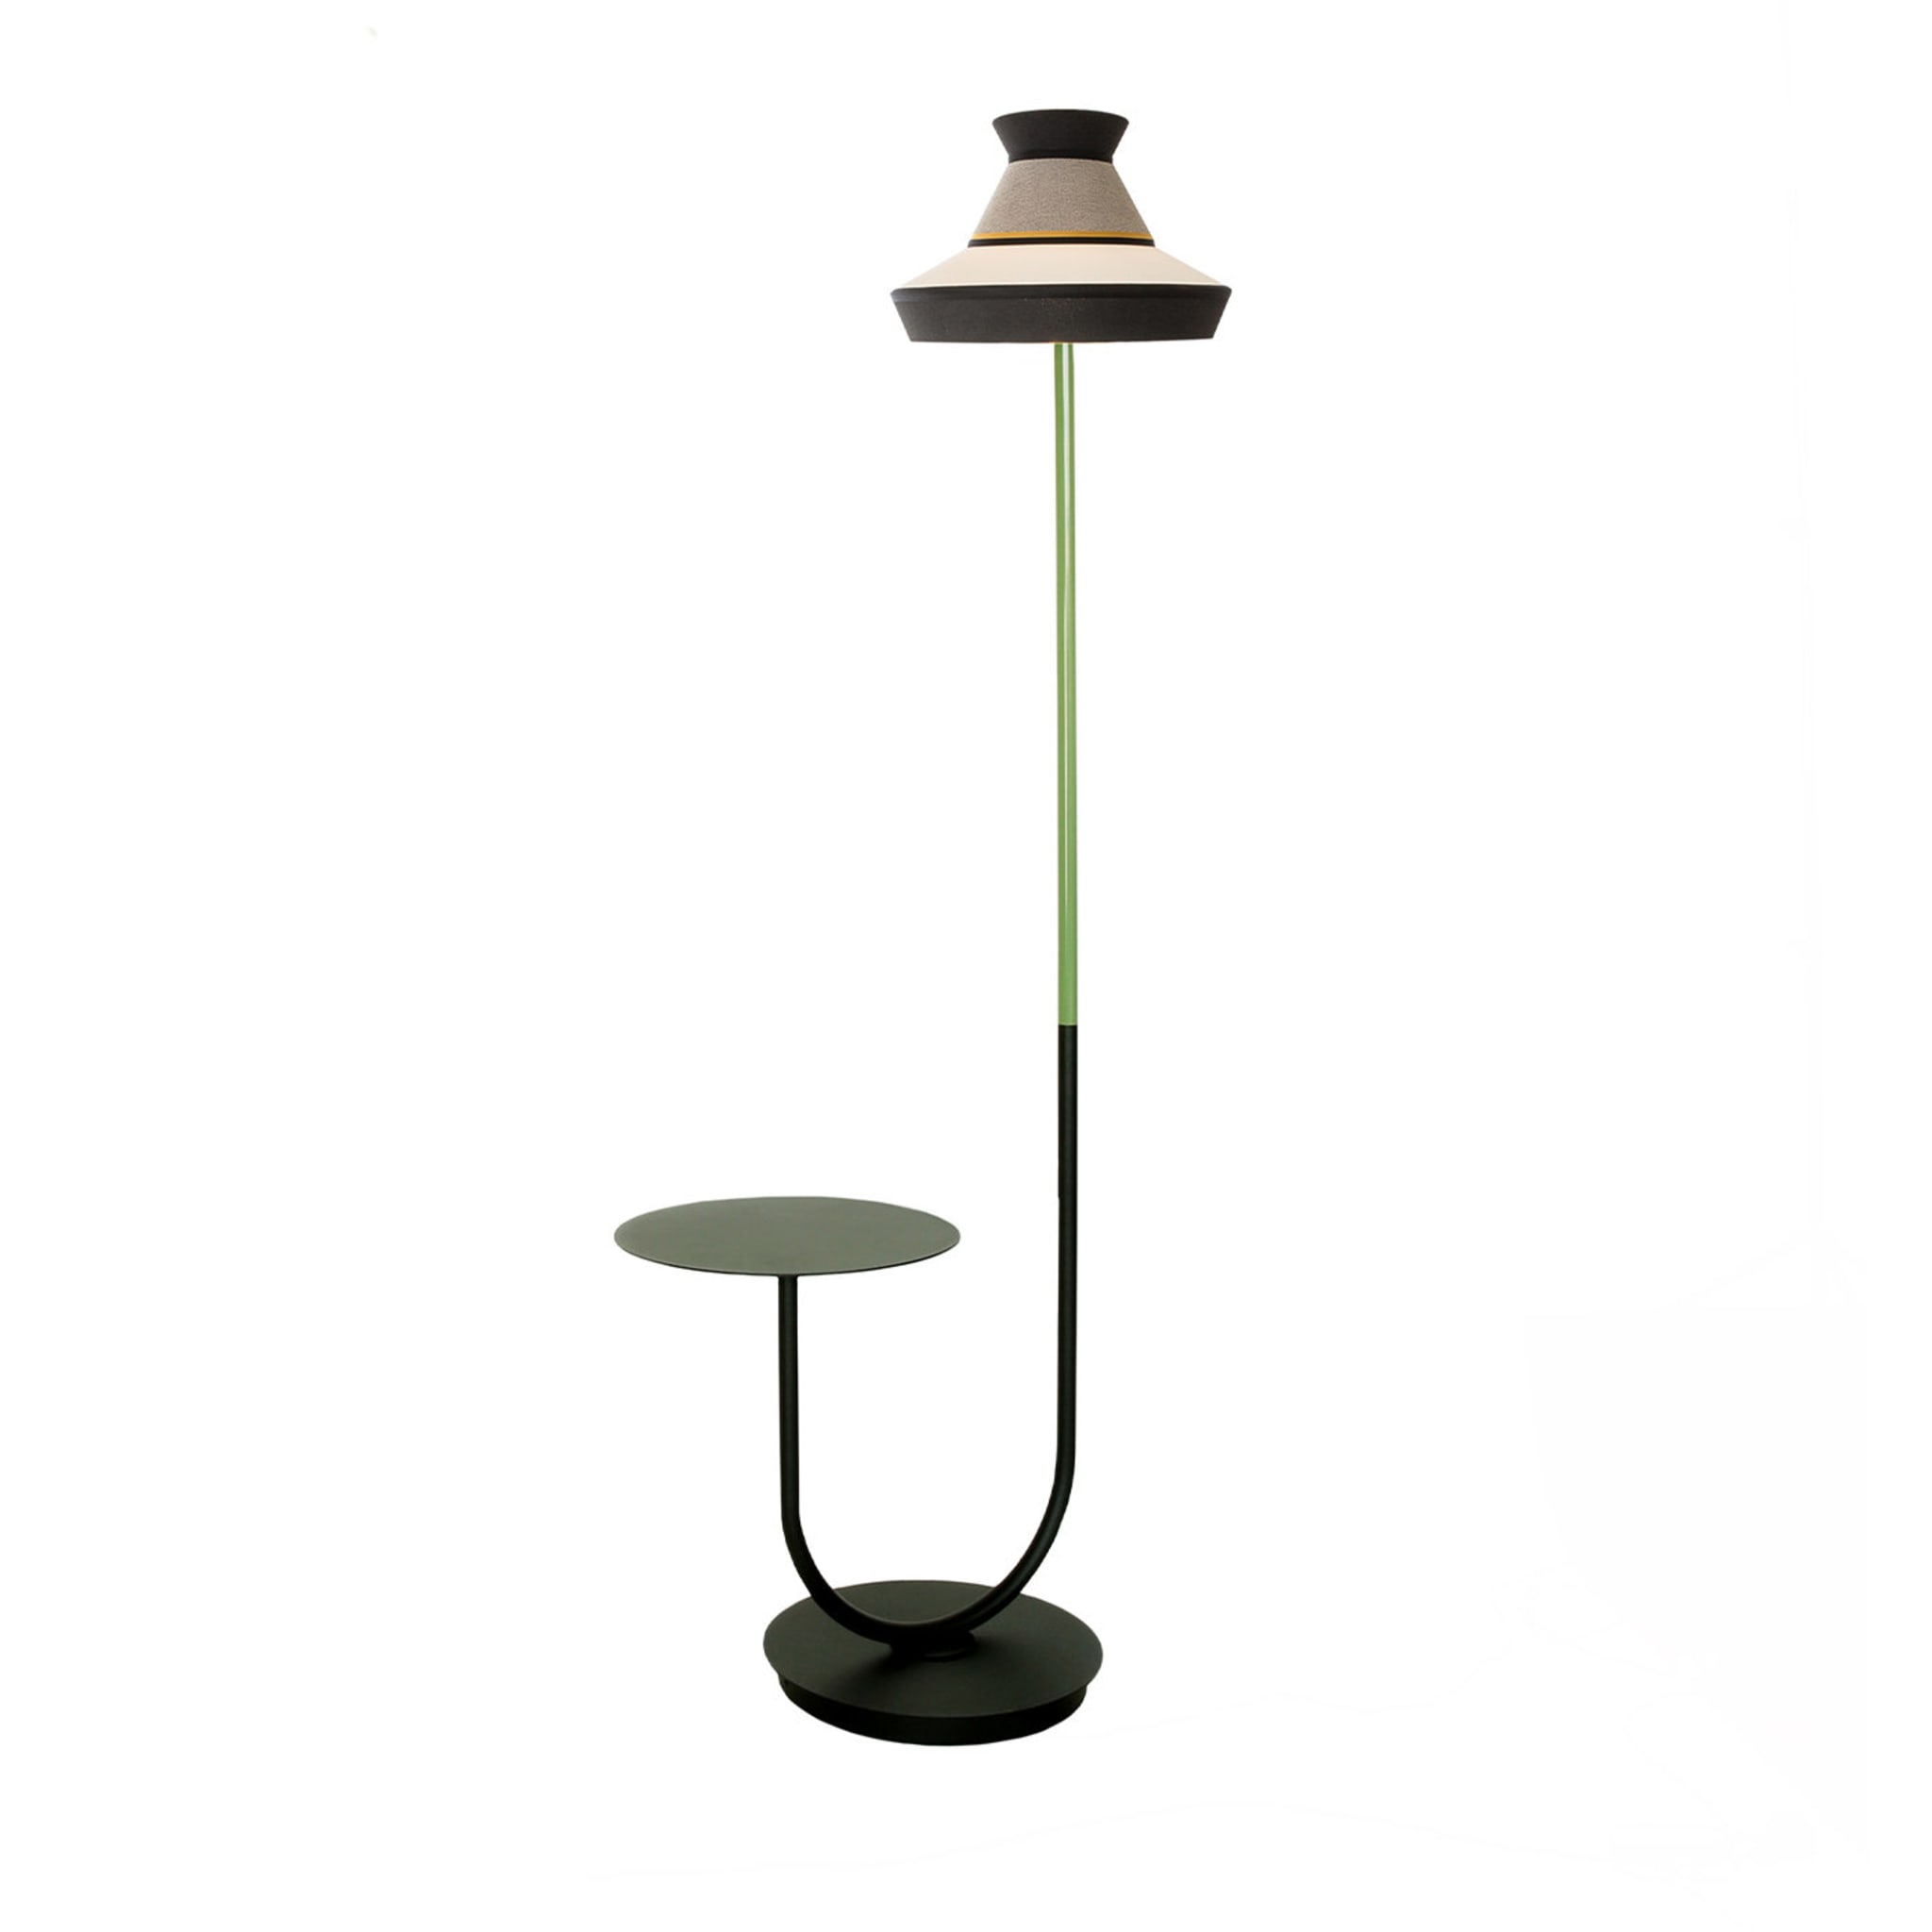 Calypso Guadaloupe Outdoor Floor + Table Lamp By Servomuto - Main view